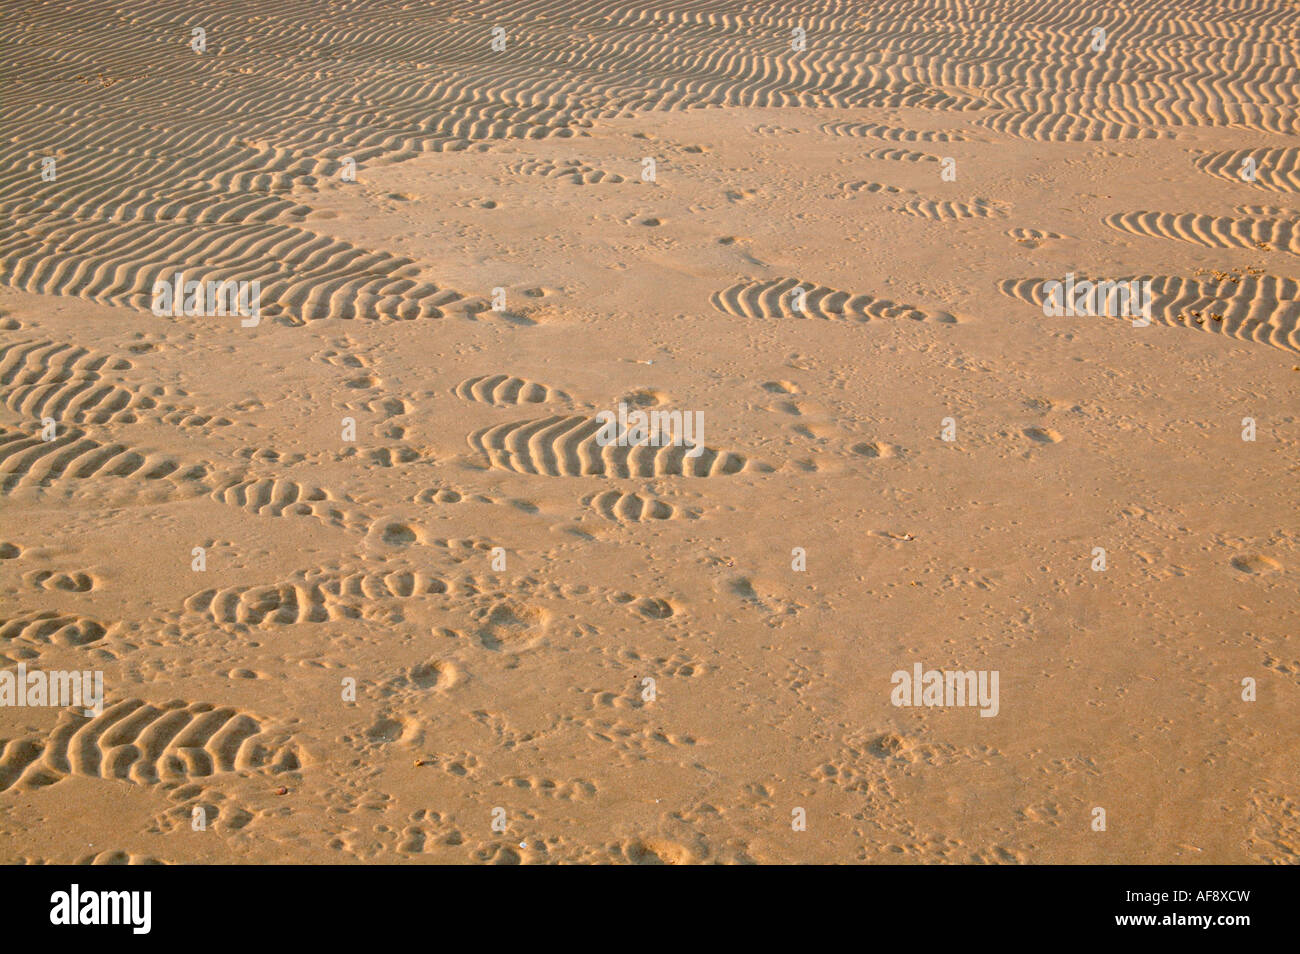 Wet beach sand with sand ripples Stock Photo